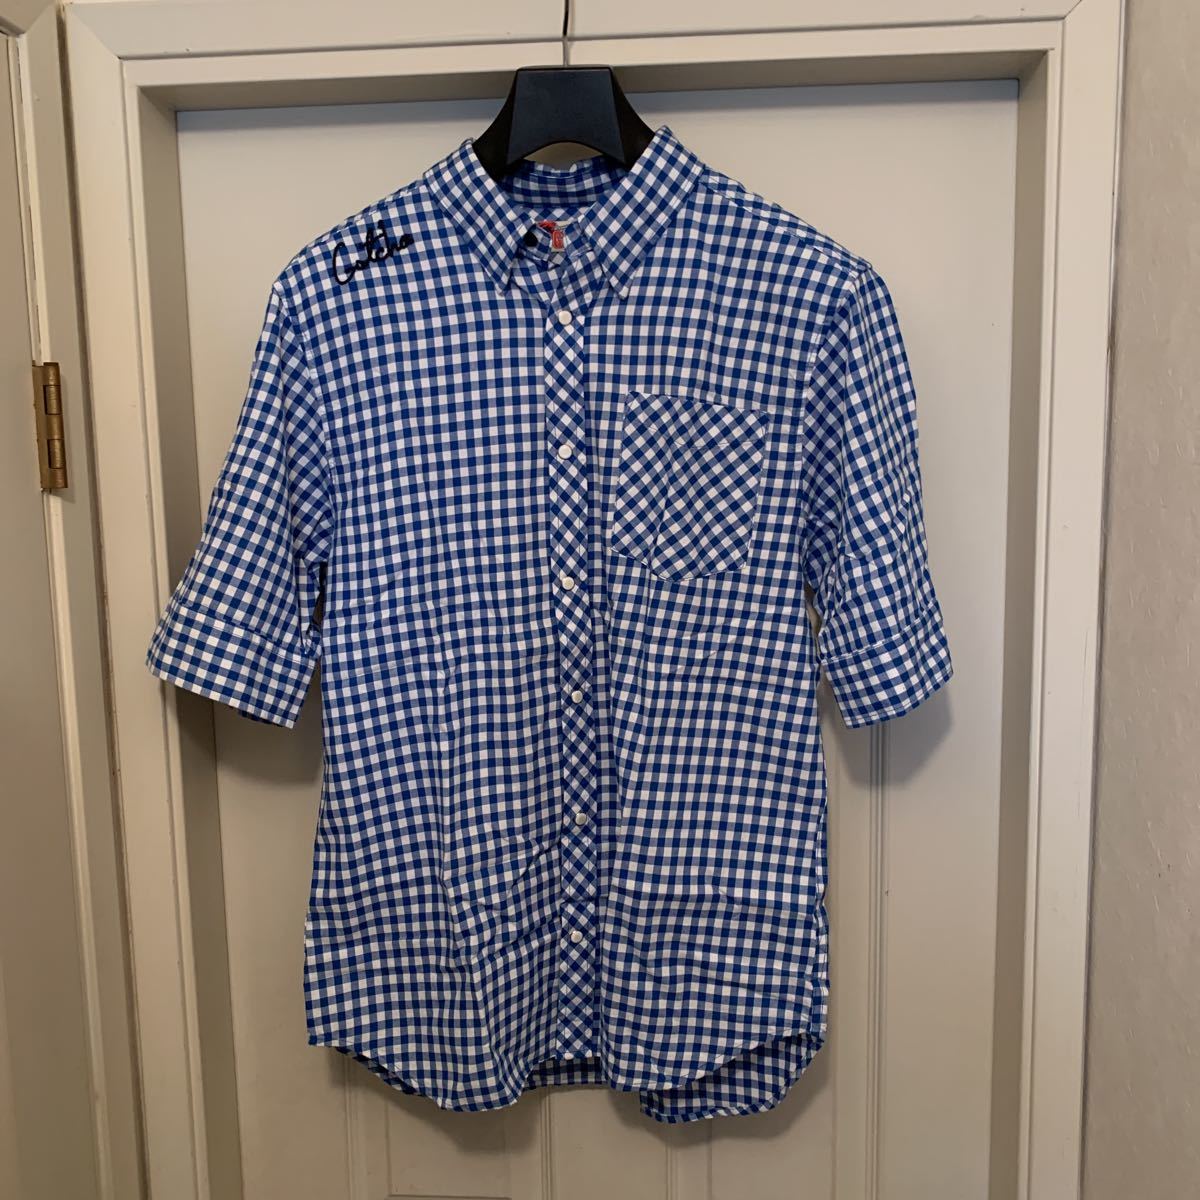  short sleeves shirt |GOTCHA| unused | size XL|5 minute sleeve |ga tea | width of a garment about 52| dress length approximately 76 centimeter 